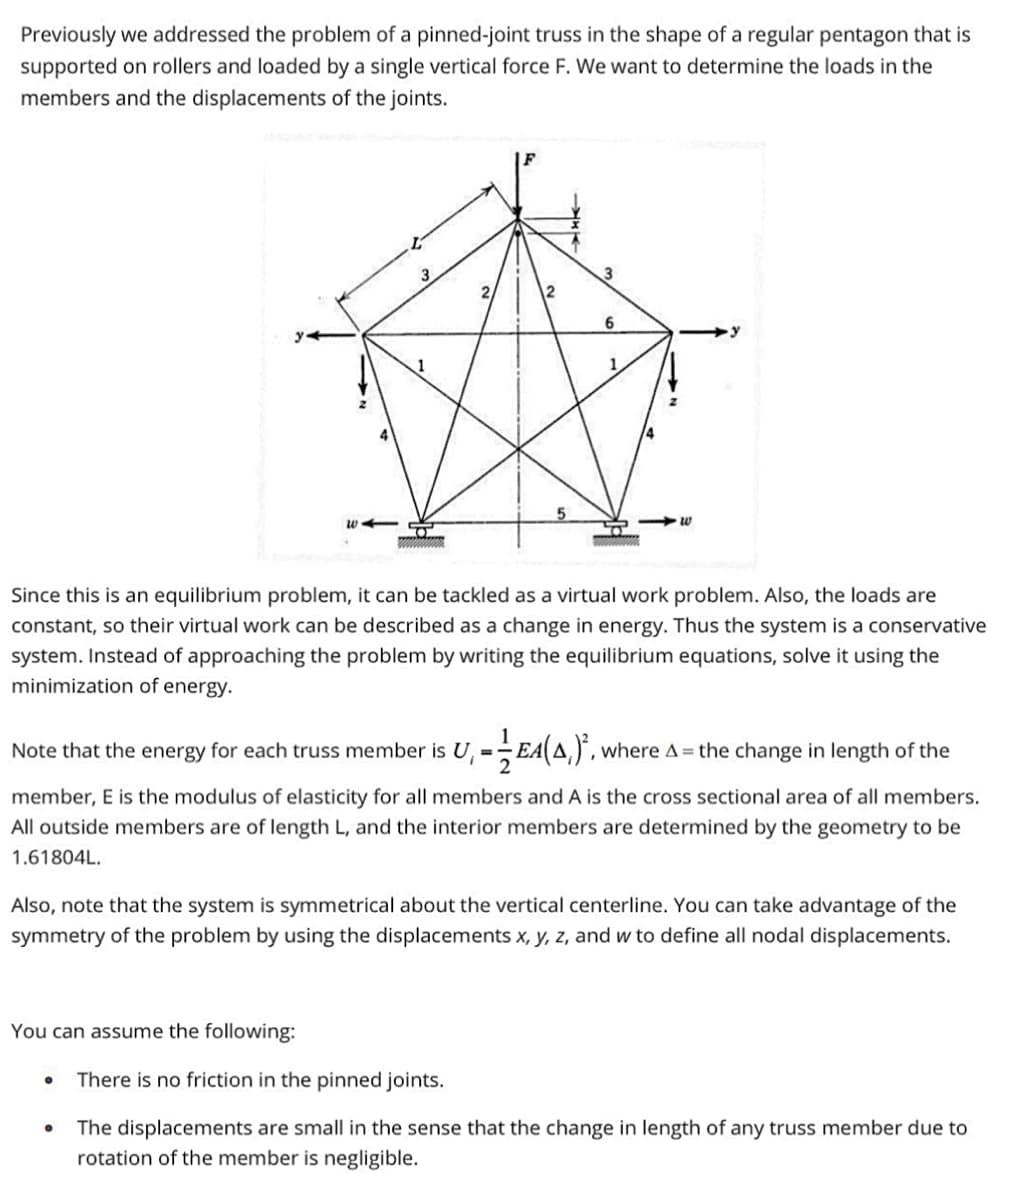 Previously we addressed the problem of a pinned-joint truss in the shape of a regular pentagon that is
supported on rollers and loaded by a single vertical force F. We want to determine the loads in the
members and the displacements of the joints.
4
F
You can assume the following:
3
Since this is an equilibrium problem, it can be tackled as a virtual work problem. Also, the loads are
constant, so their virtual work can be described as a change in energy. Thus the system is a conservative
system. Instead of approaching the problem by writing the equilibrium equations, solve it using the
minimization of energy.
=
6
-E4(A)², where A = the change in length of the
Note that the energy for each truss member is
member, E is the modulus of elasticity for all members and A is the cross sectional area of all members.
All outside members are of length L, and the interior members are determined by the geometry to be
1.61804L.
Also, note that the system is symmetrical about the vertical centerline. You can take advantage of the
symmetry of the problem by using the displacements x, y, z, and w to define all nodal displacements.
There is no friction in the pinned joints.
The displacements are small in the sense that the change in length of any truss member due to
rotation of the member is negligible.